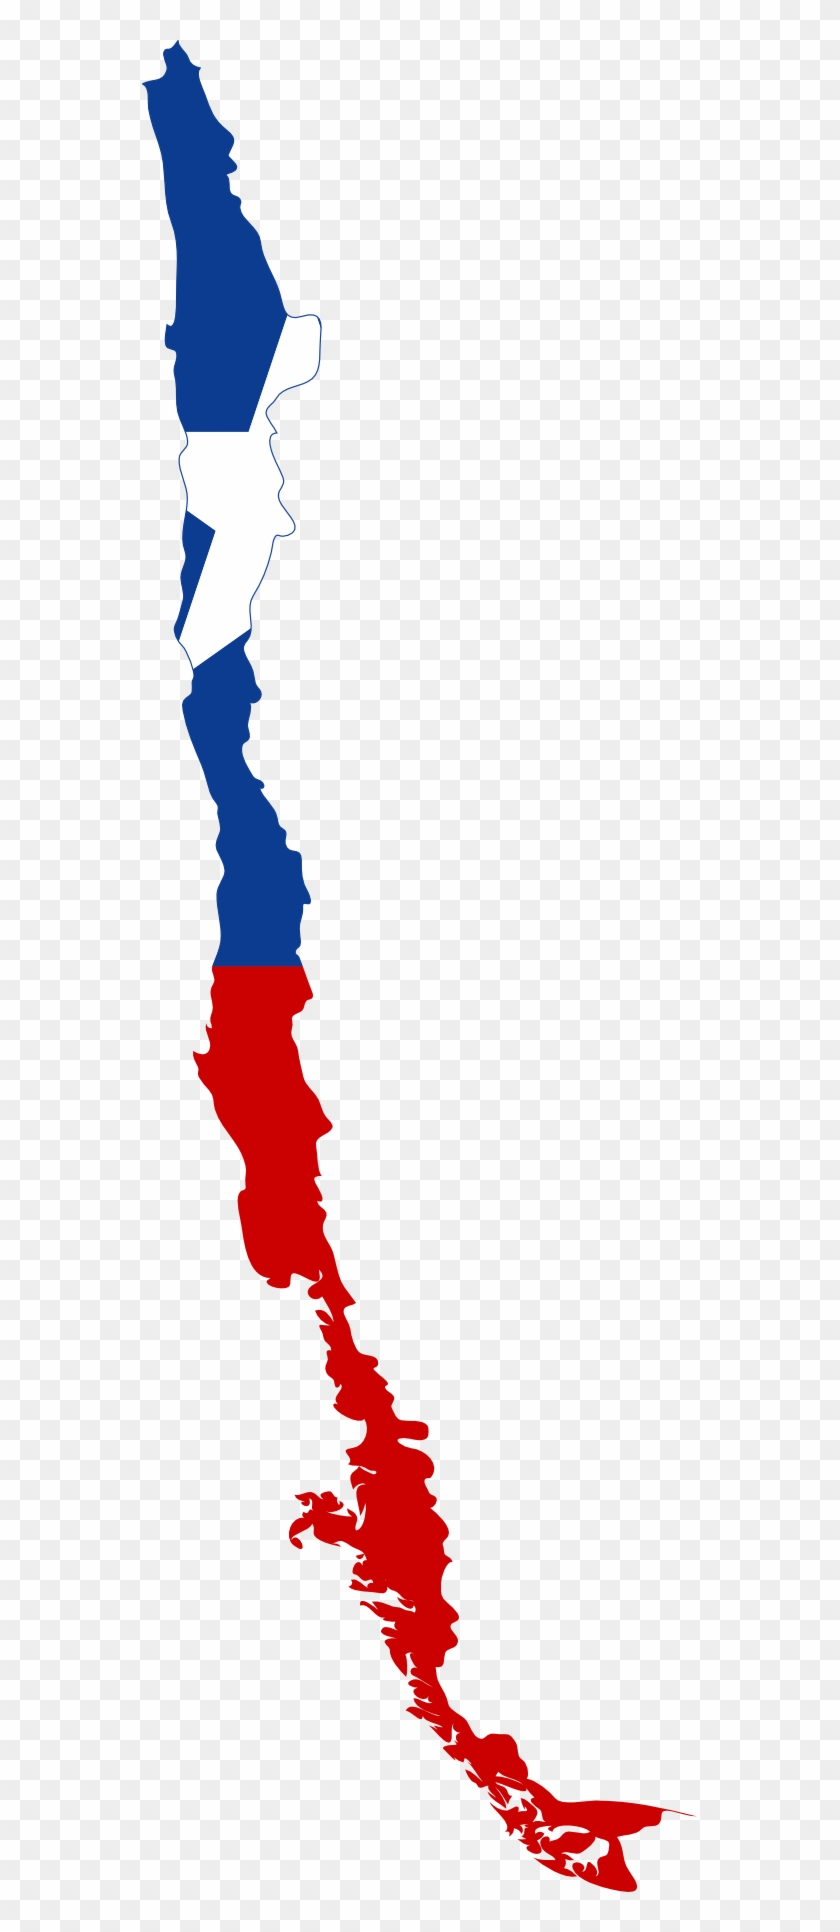 Chile Clip Art - Chile Flag On Map #371924